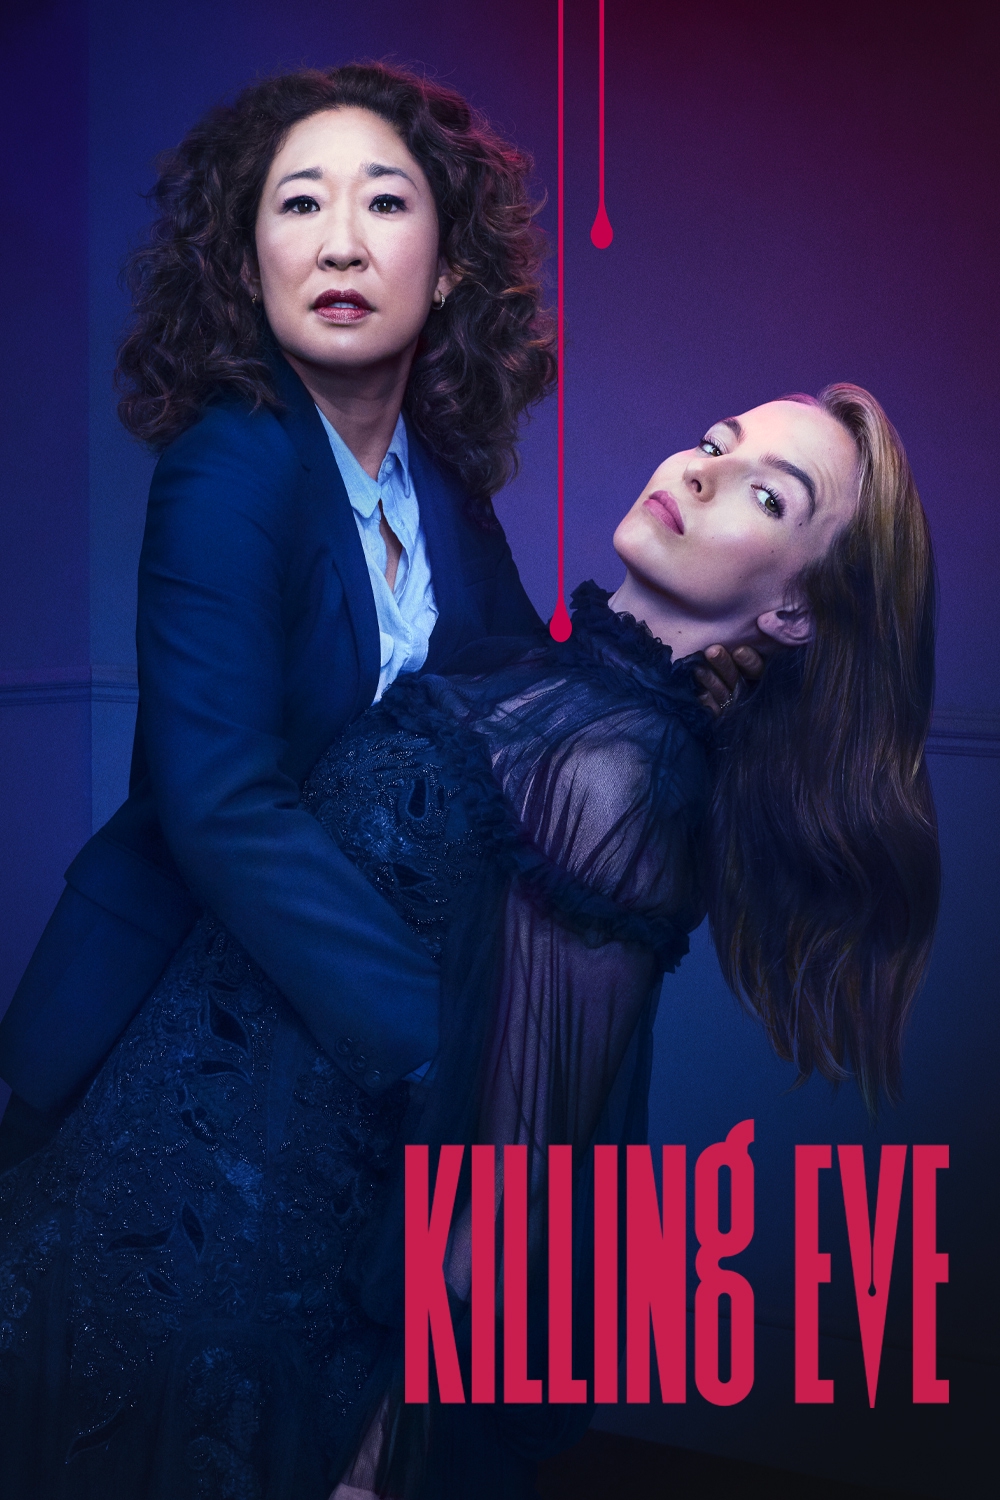 Watch Killing Eve Online Now Streaming Stan.